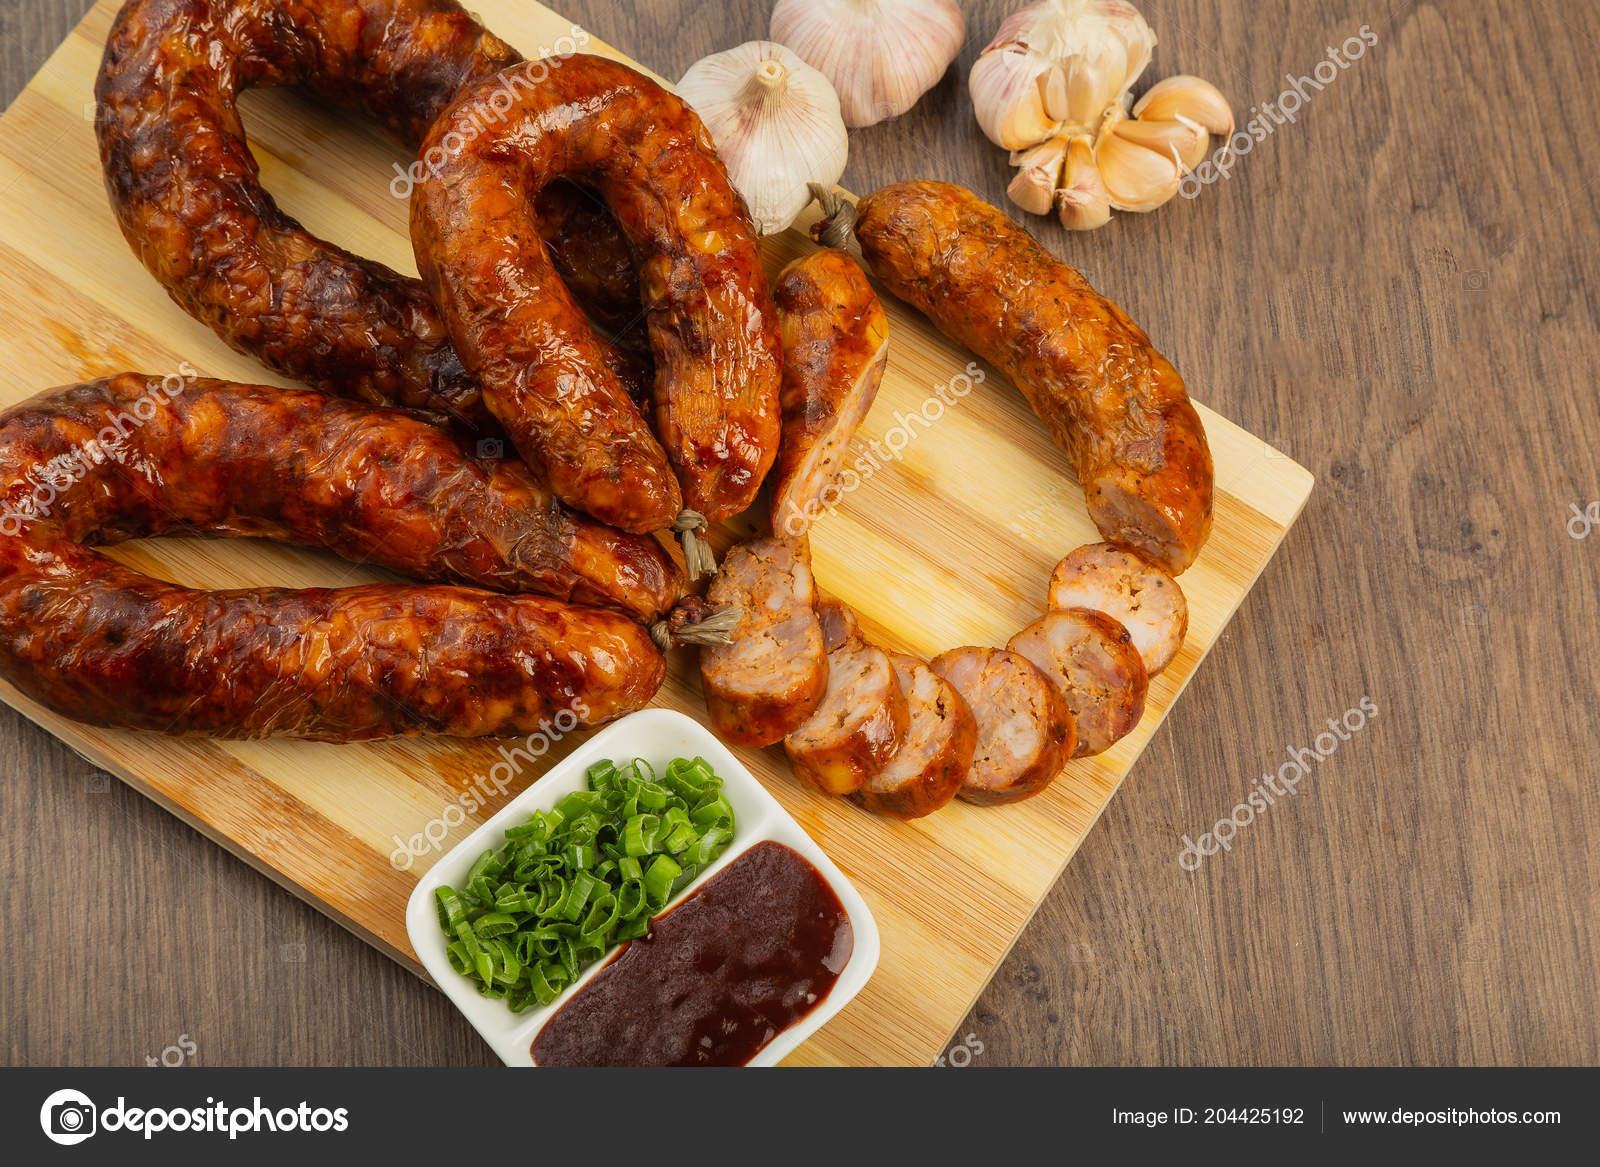 Homemade sausage on a wooden background